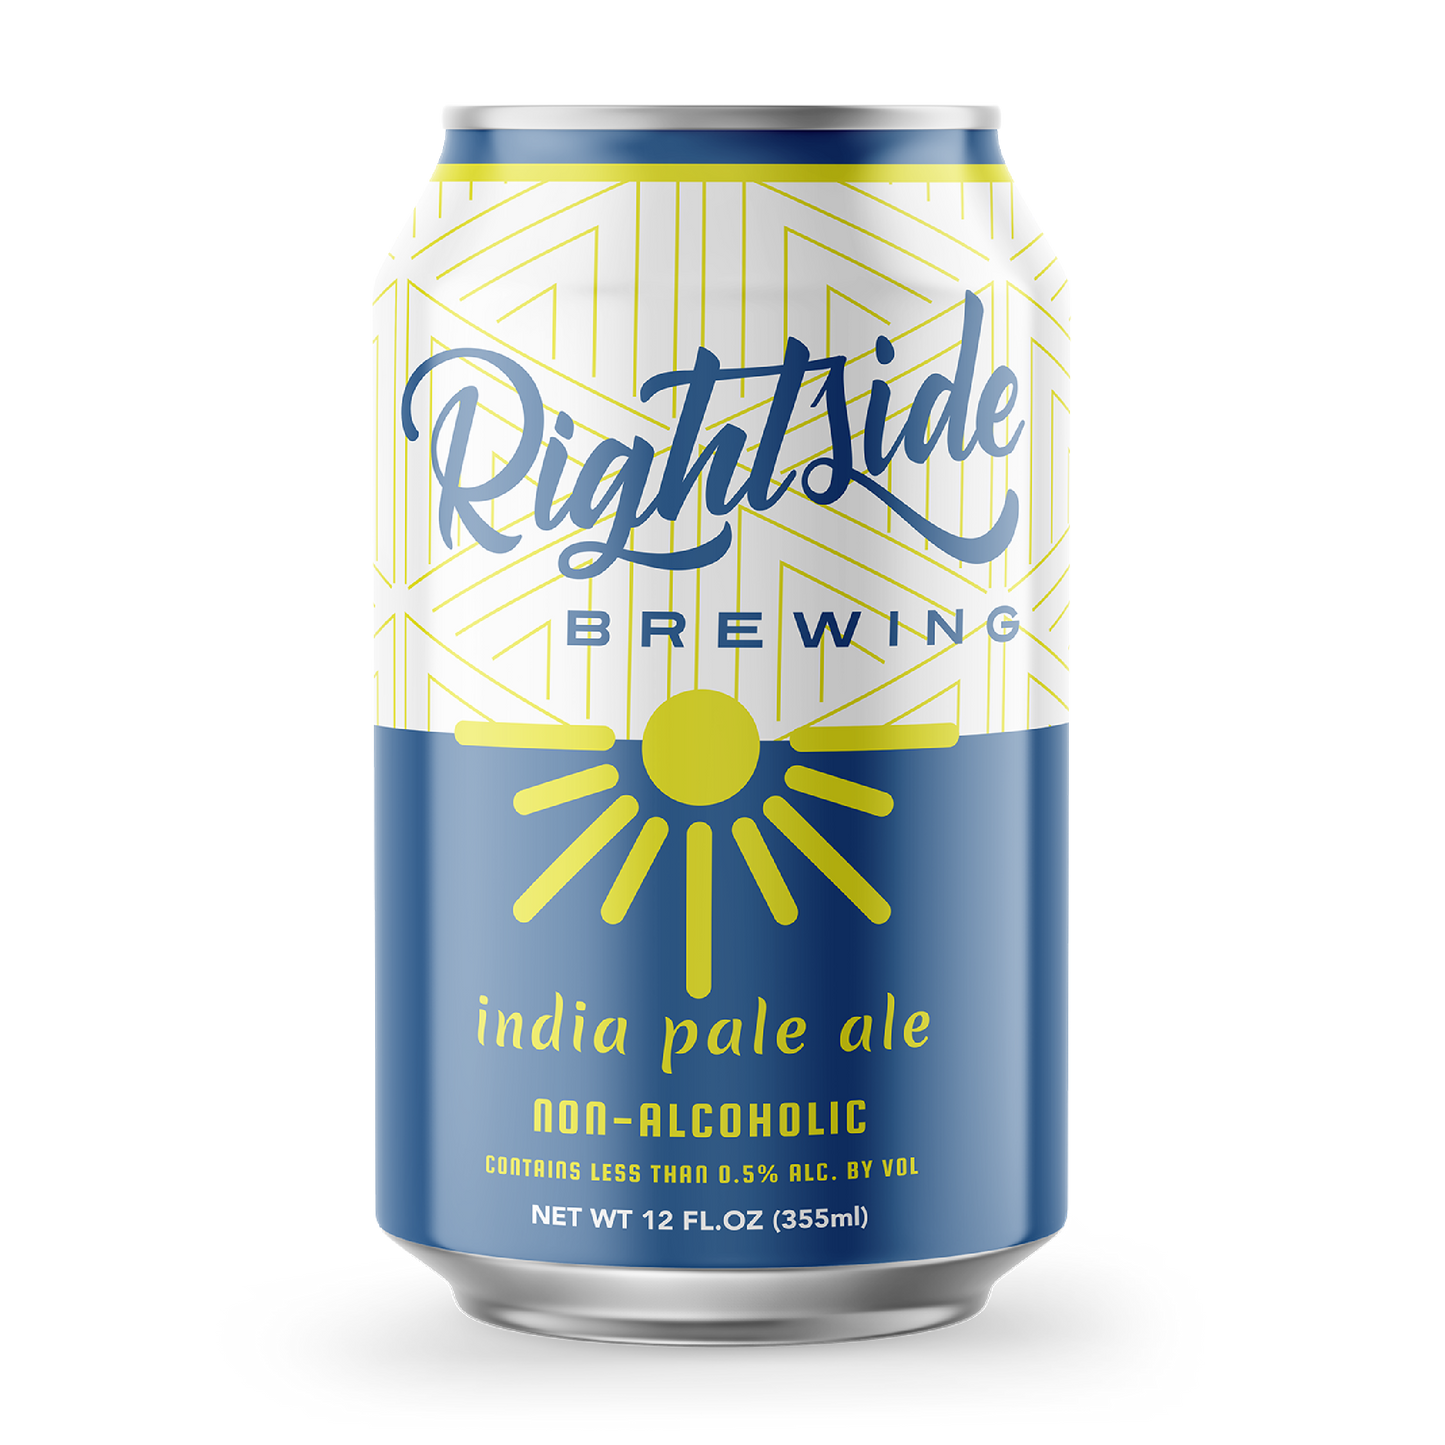 Rightside India Pale Ale